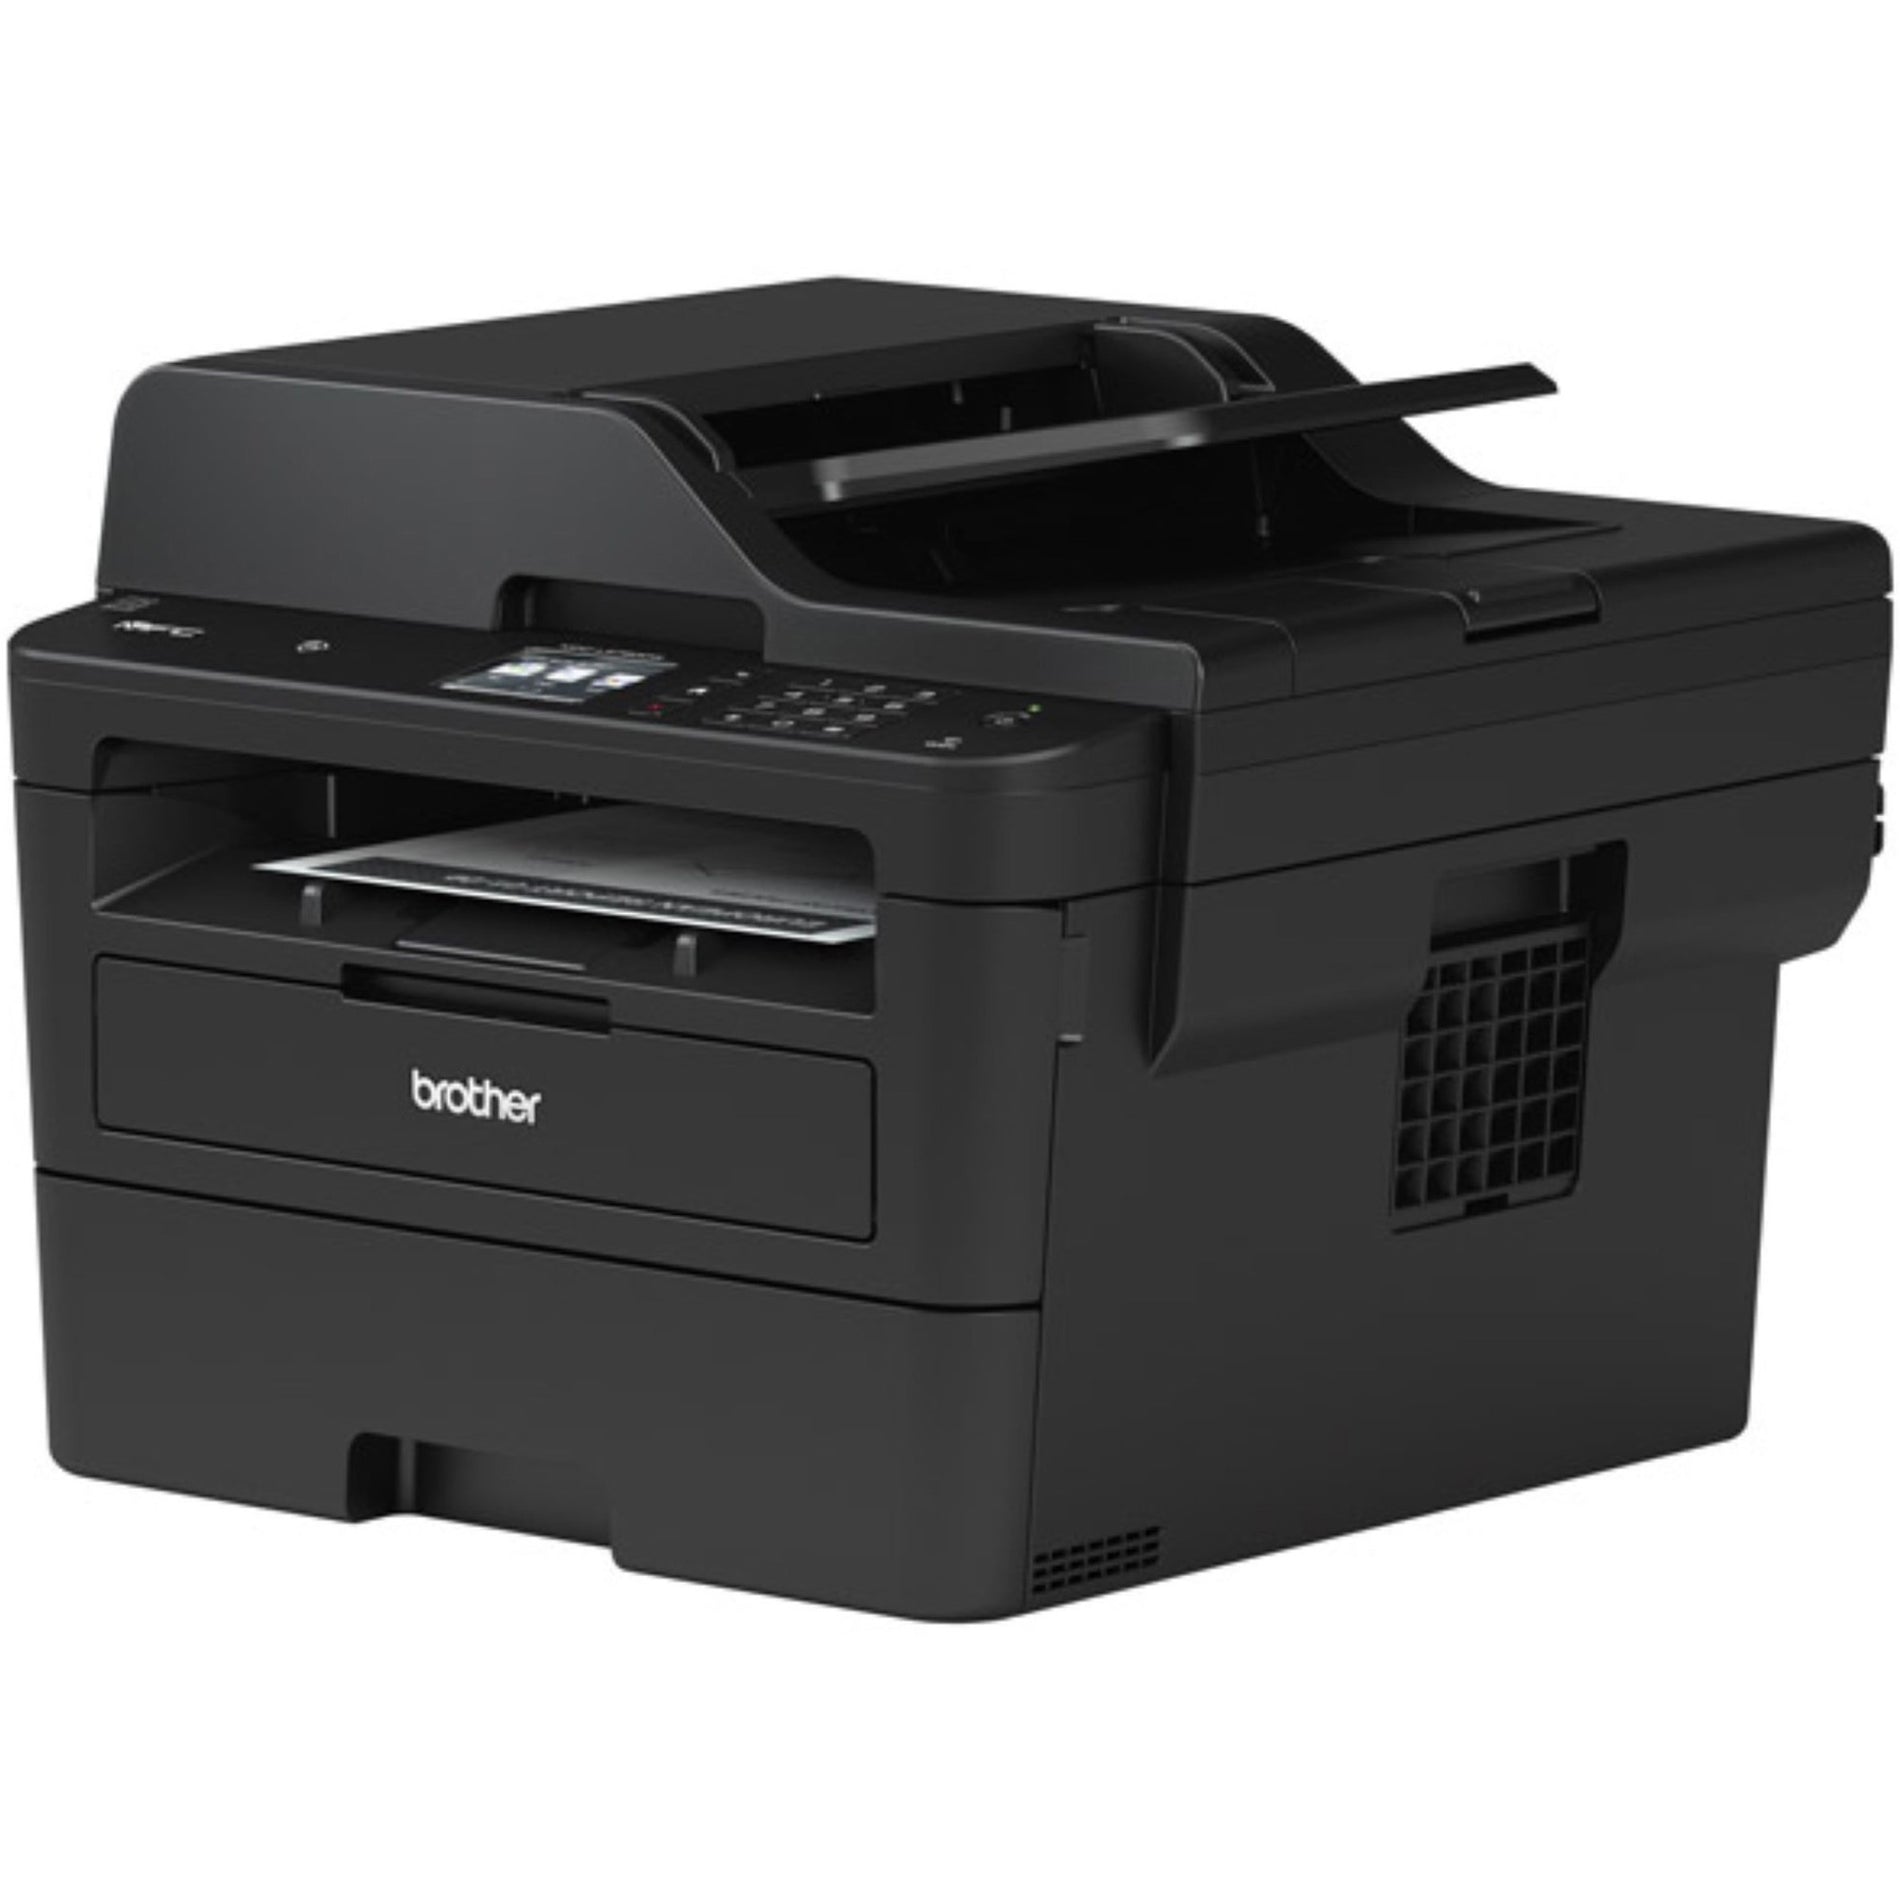 Brother MFC-L2750DW Multifunction Monochrome Laser Printer, 2.7" Touchscreen, 36 ppm